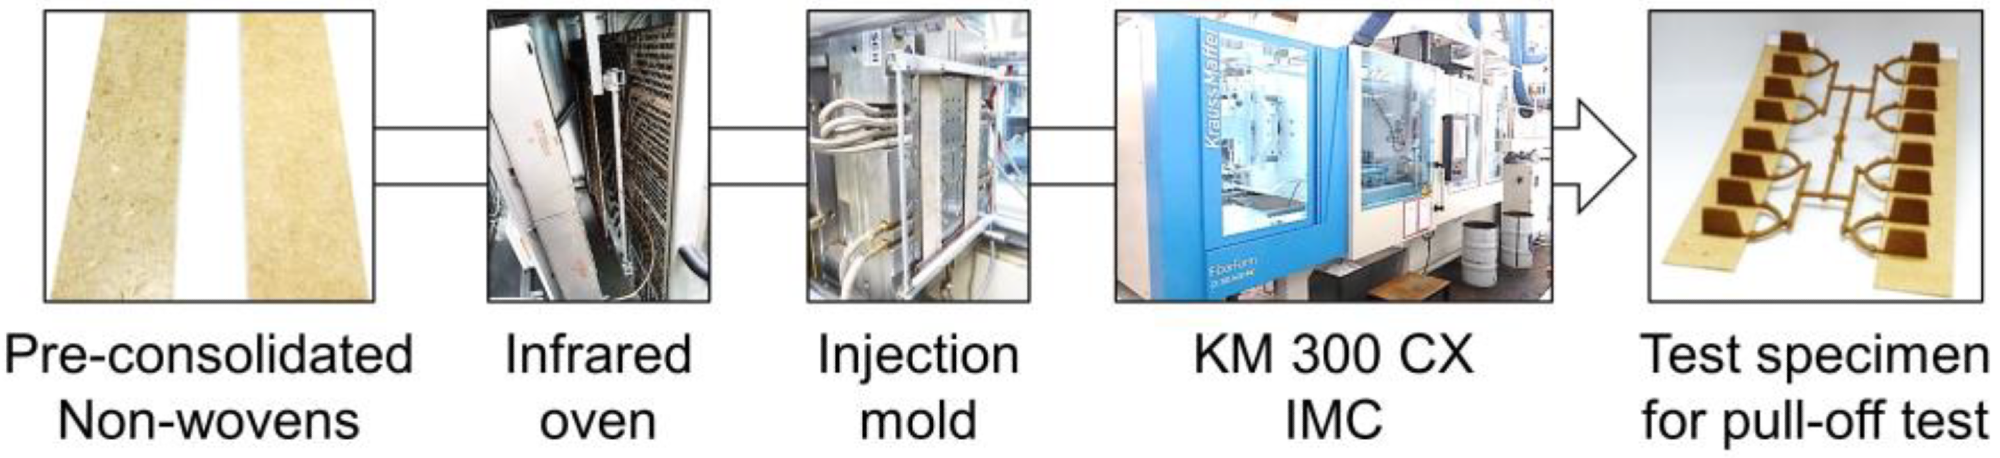 Process flow from pre-consolidated non-wovens to test specimen for pull-off tests.